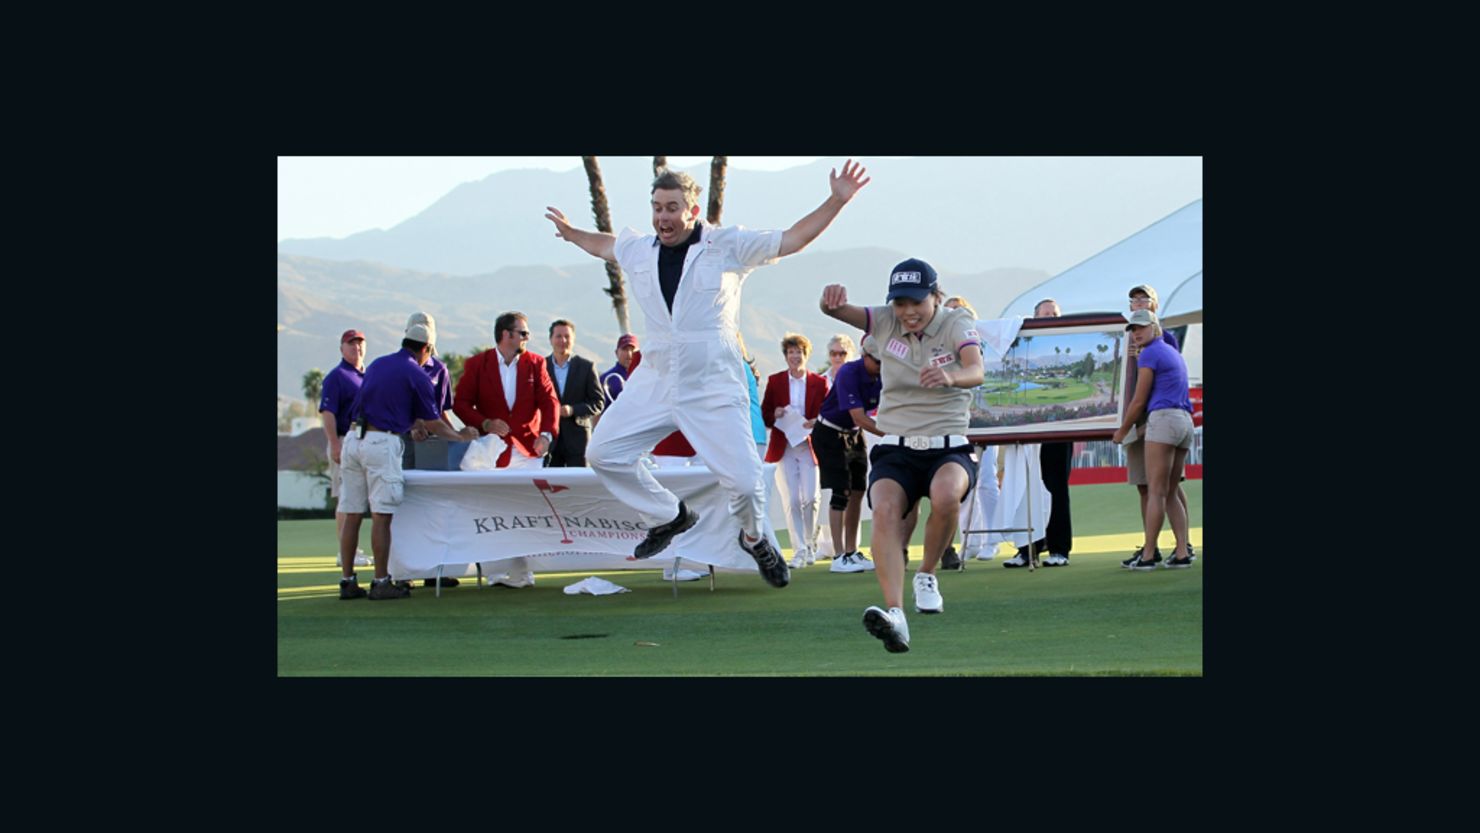 Sun Young Yoo and caddy Adam Woodward take the traditional leap into Poppie's Pond after the Korean won in a playoff